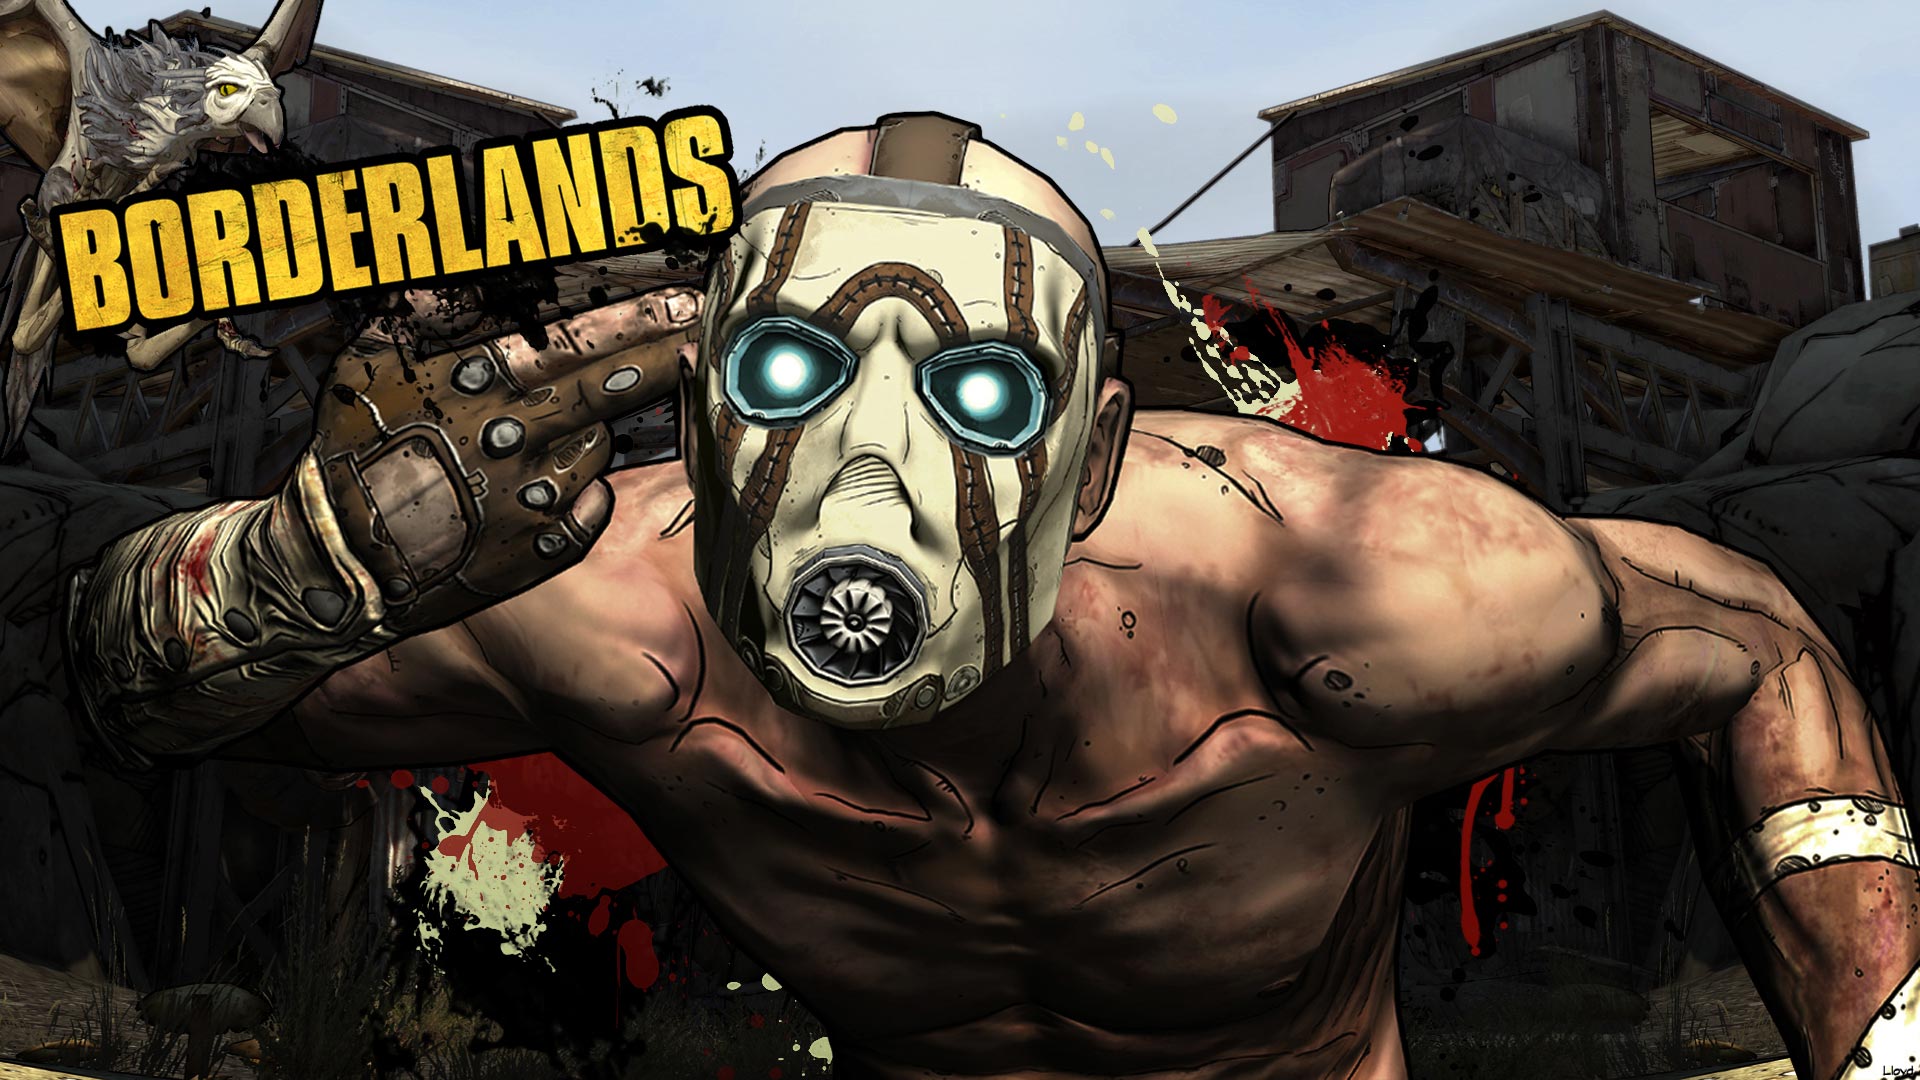 Gearbox Confirms That There Will Be More “Borderlands” - After Battleborn...